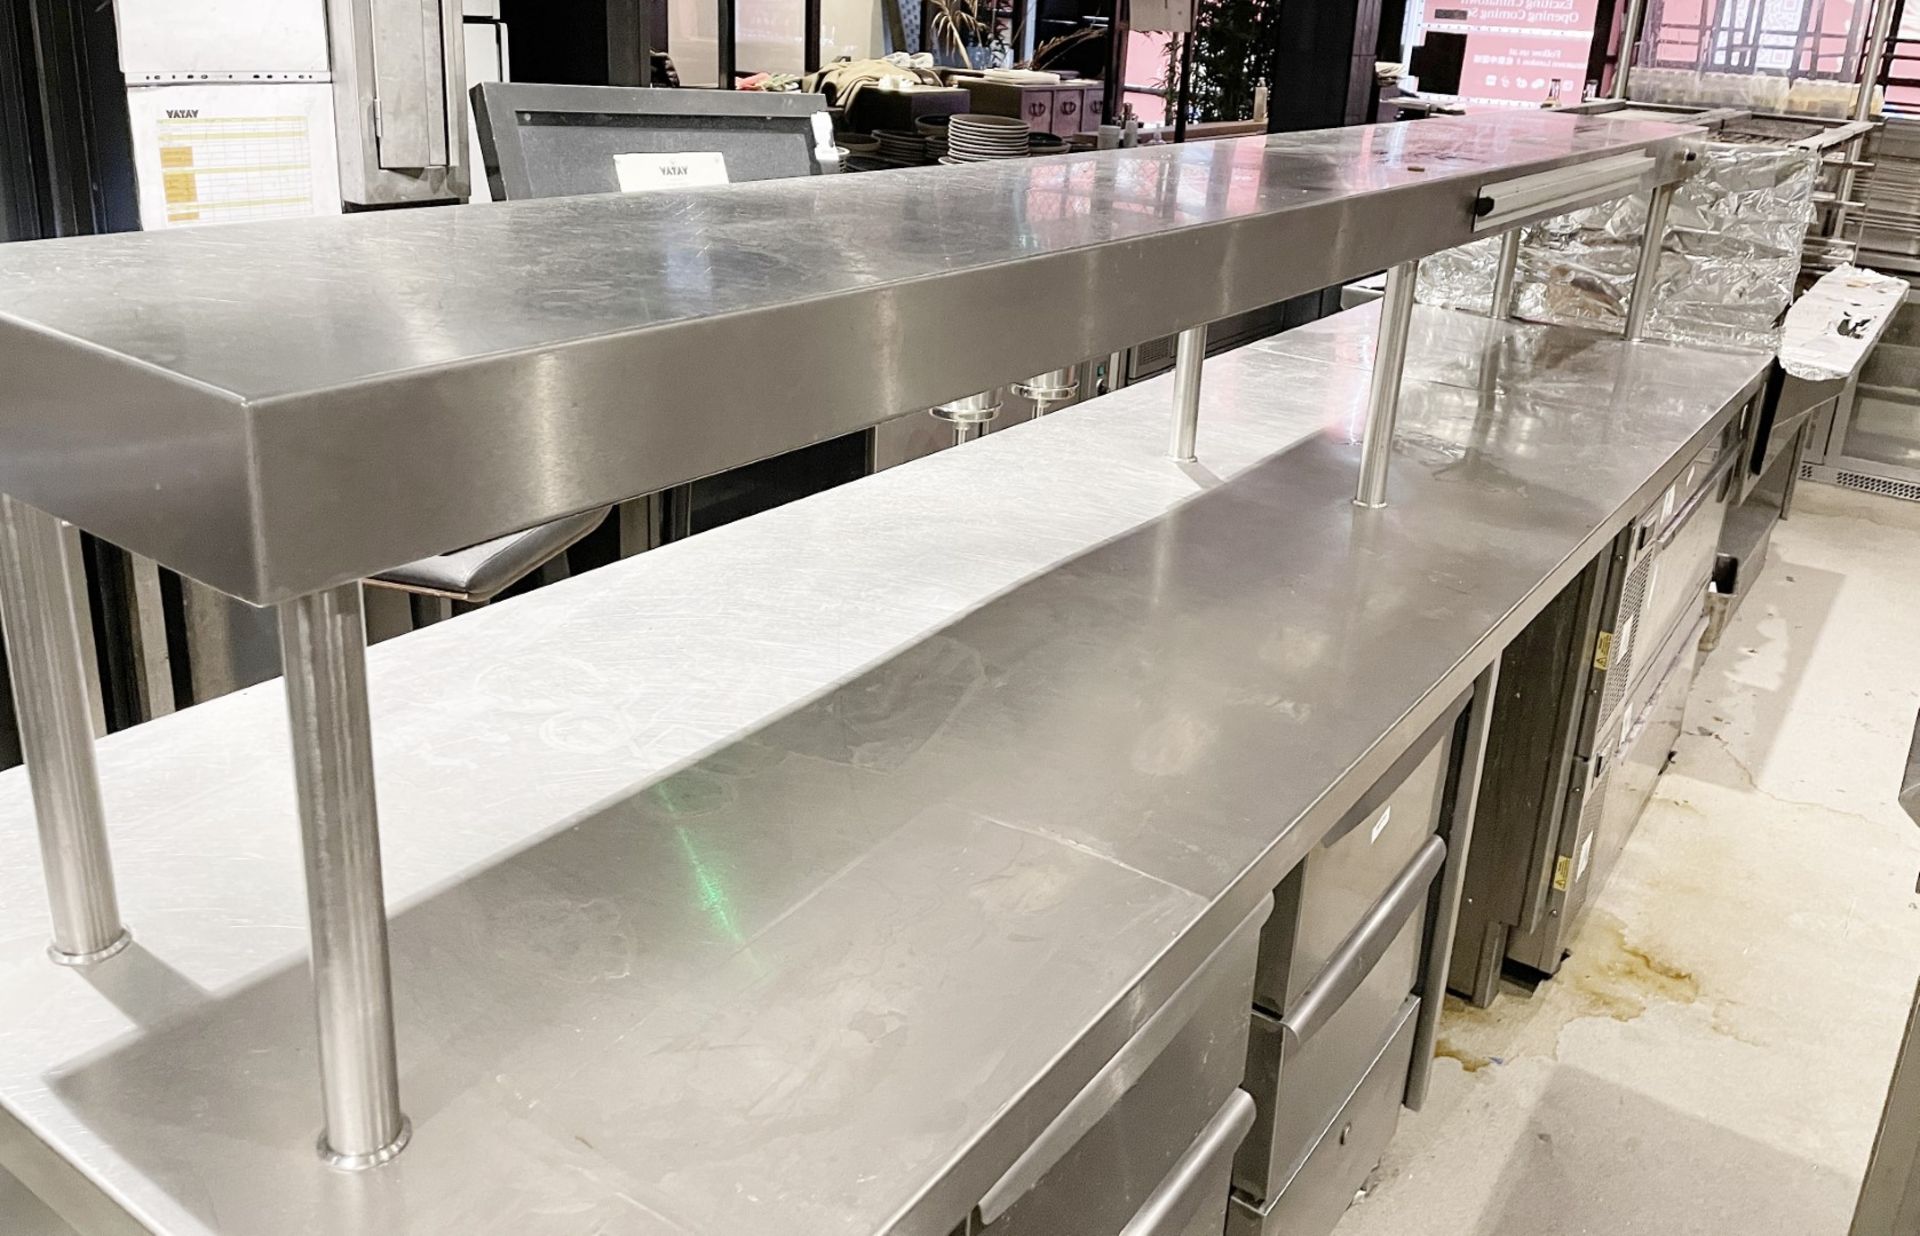 1 x Bespoke 15ft Commercial Kitchen Preparation Island with a Stainless Steel Construction - Image 12 of 15